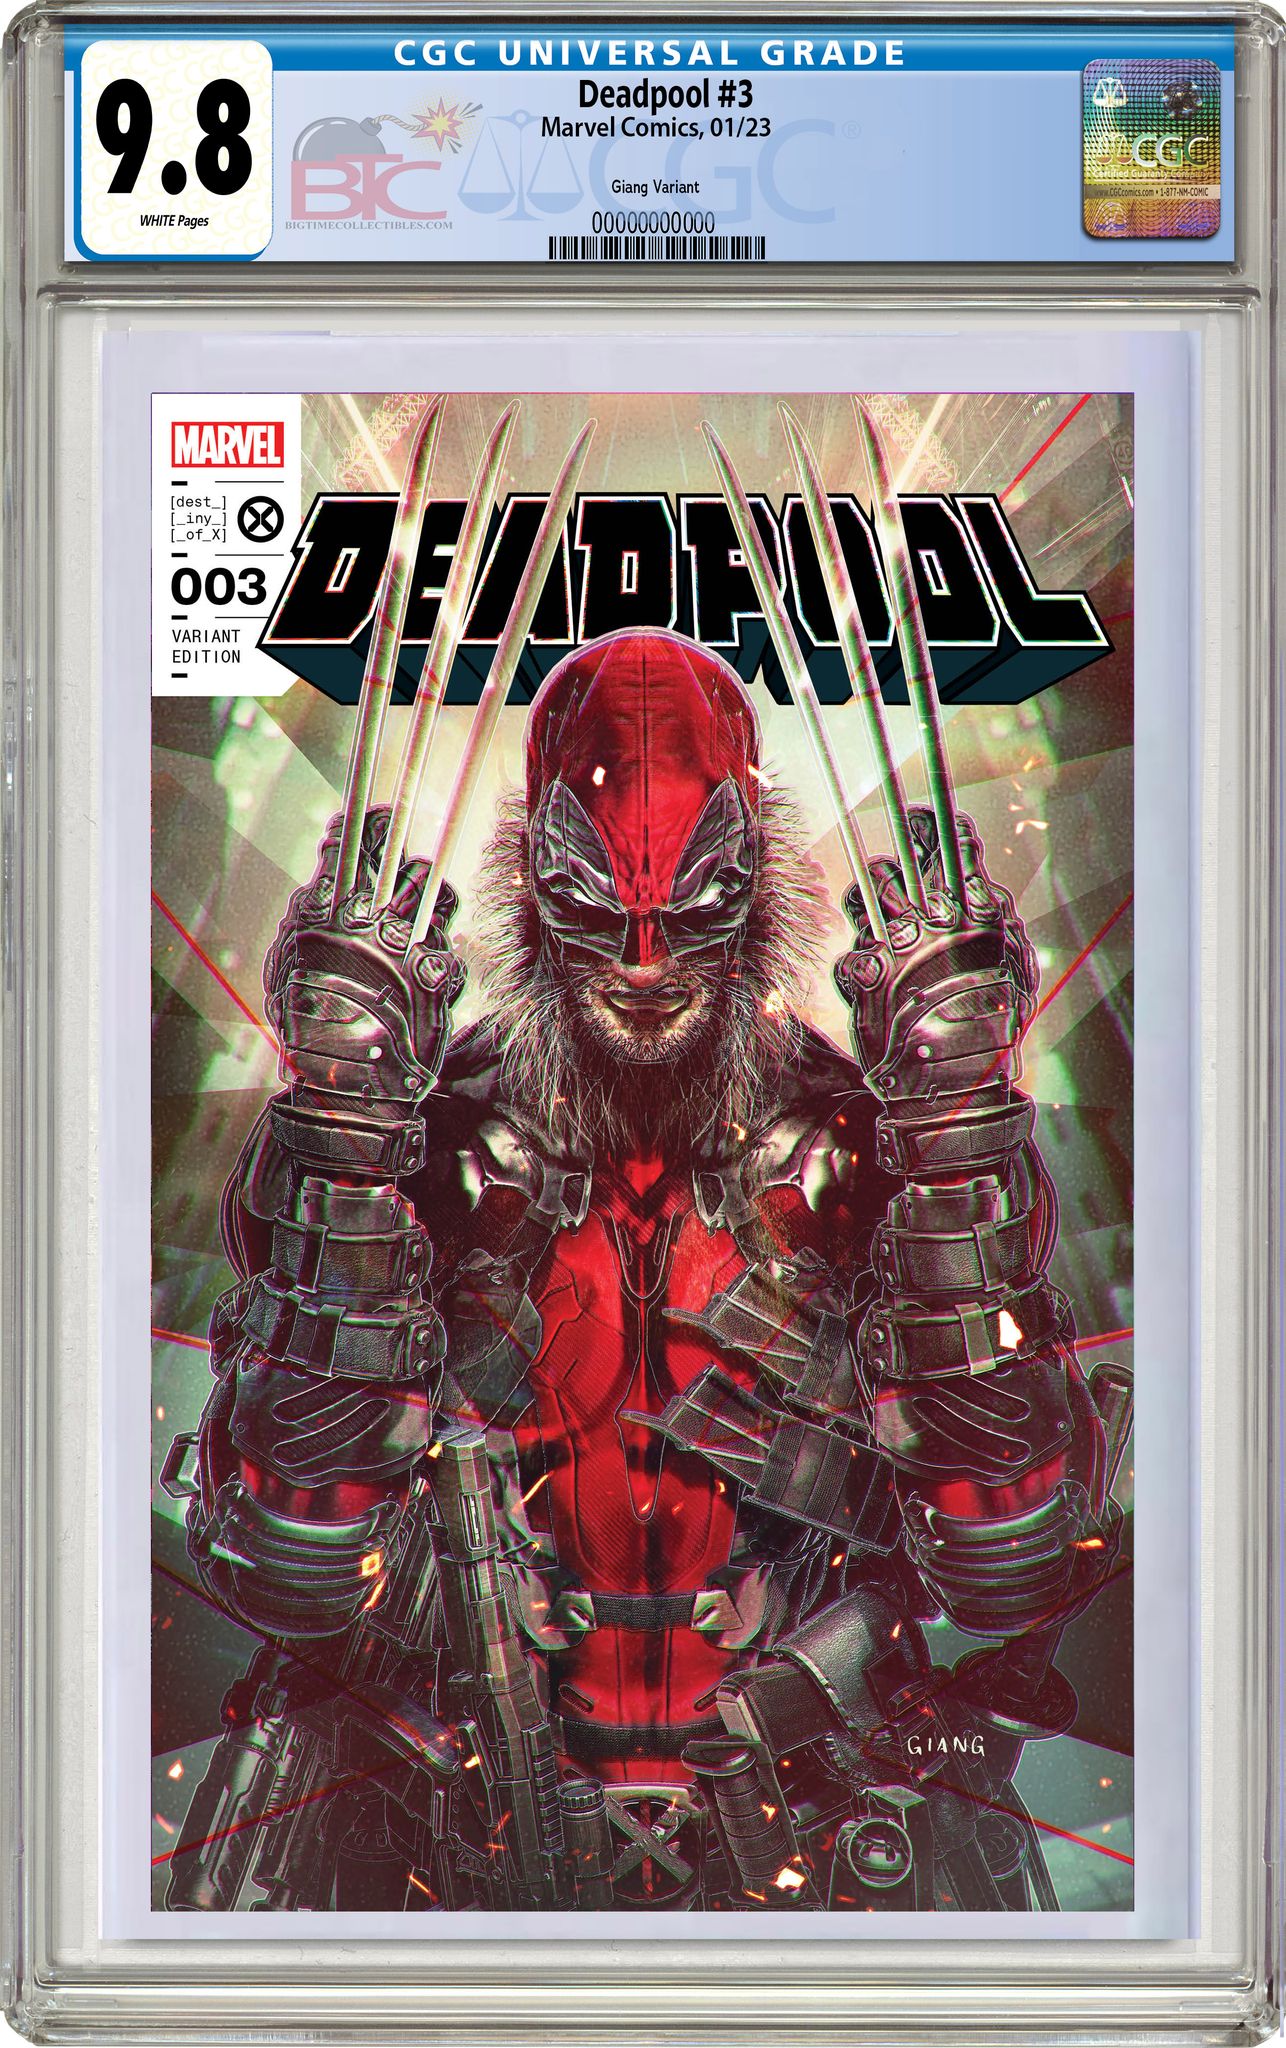 01/18/2023 DEADPOOL #3 JOHN GIANG EXCLUSIVE VARIANT OPTIONS